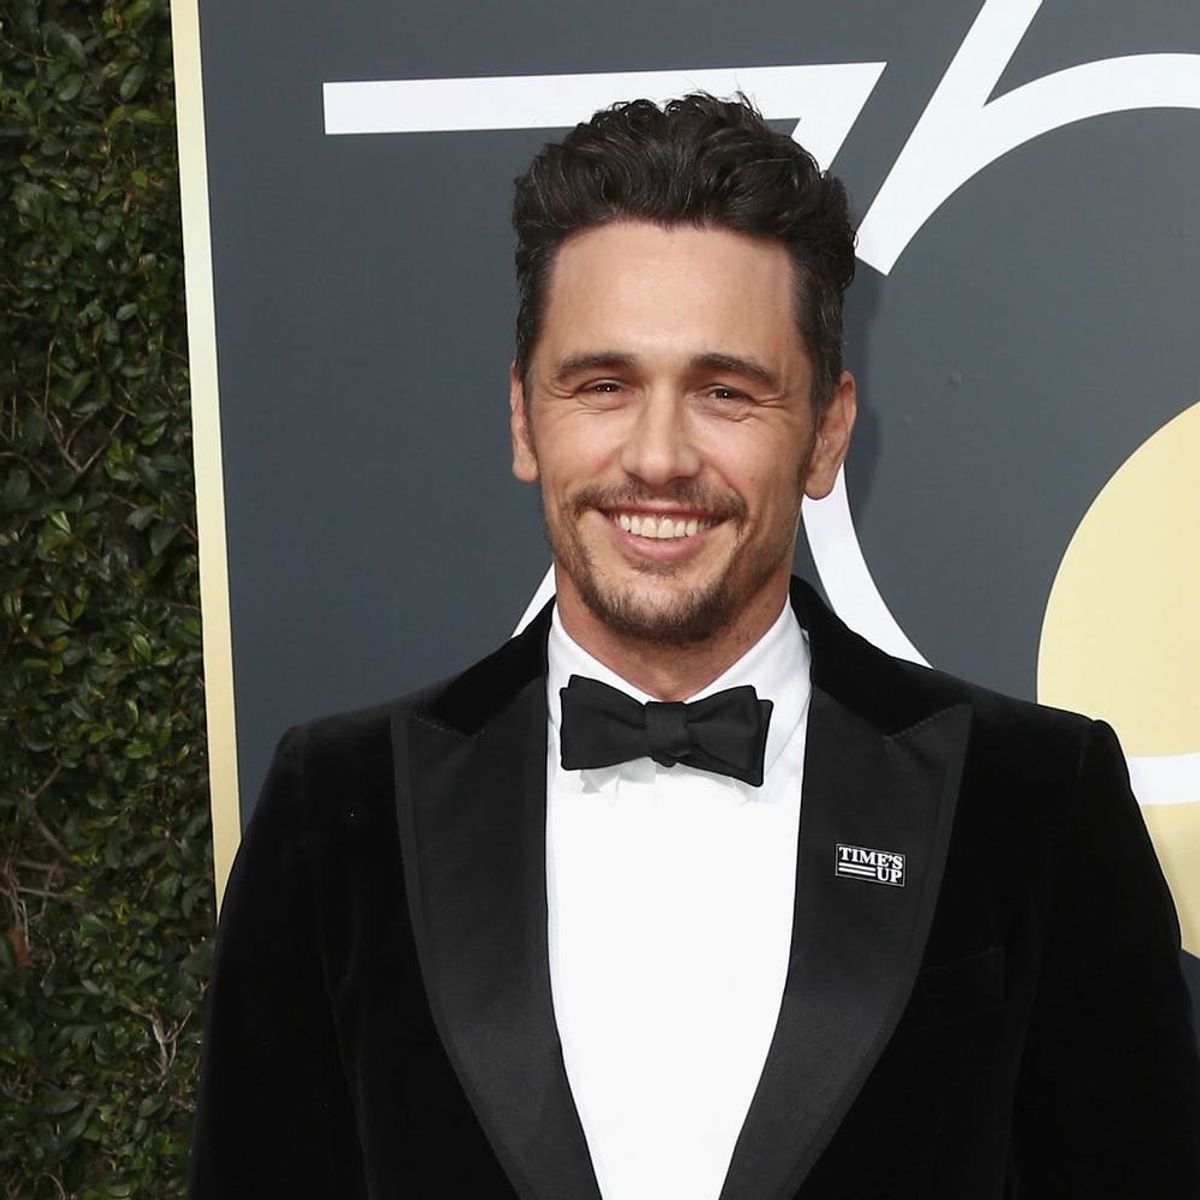 Three Former Students Are Accusing James Franco of Sexual Misconduct